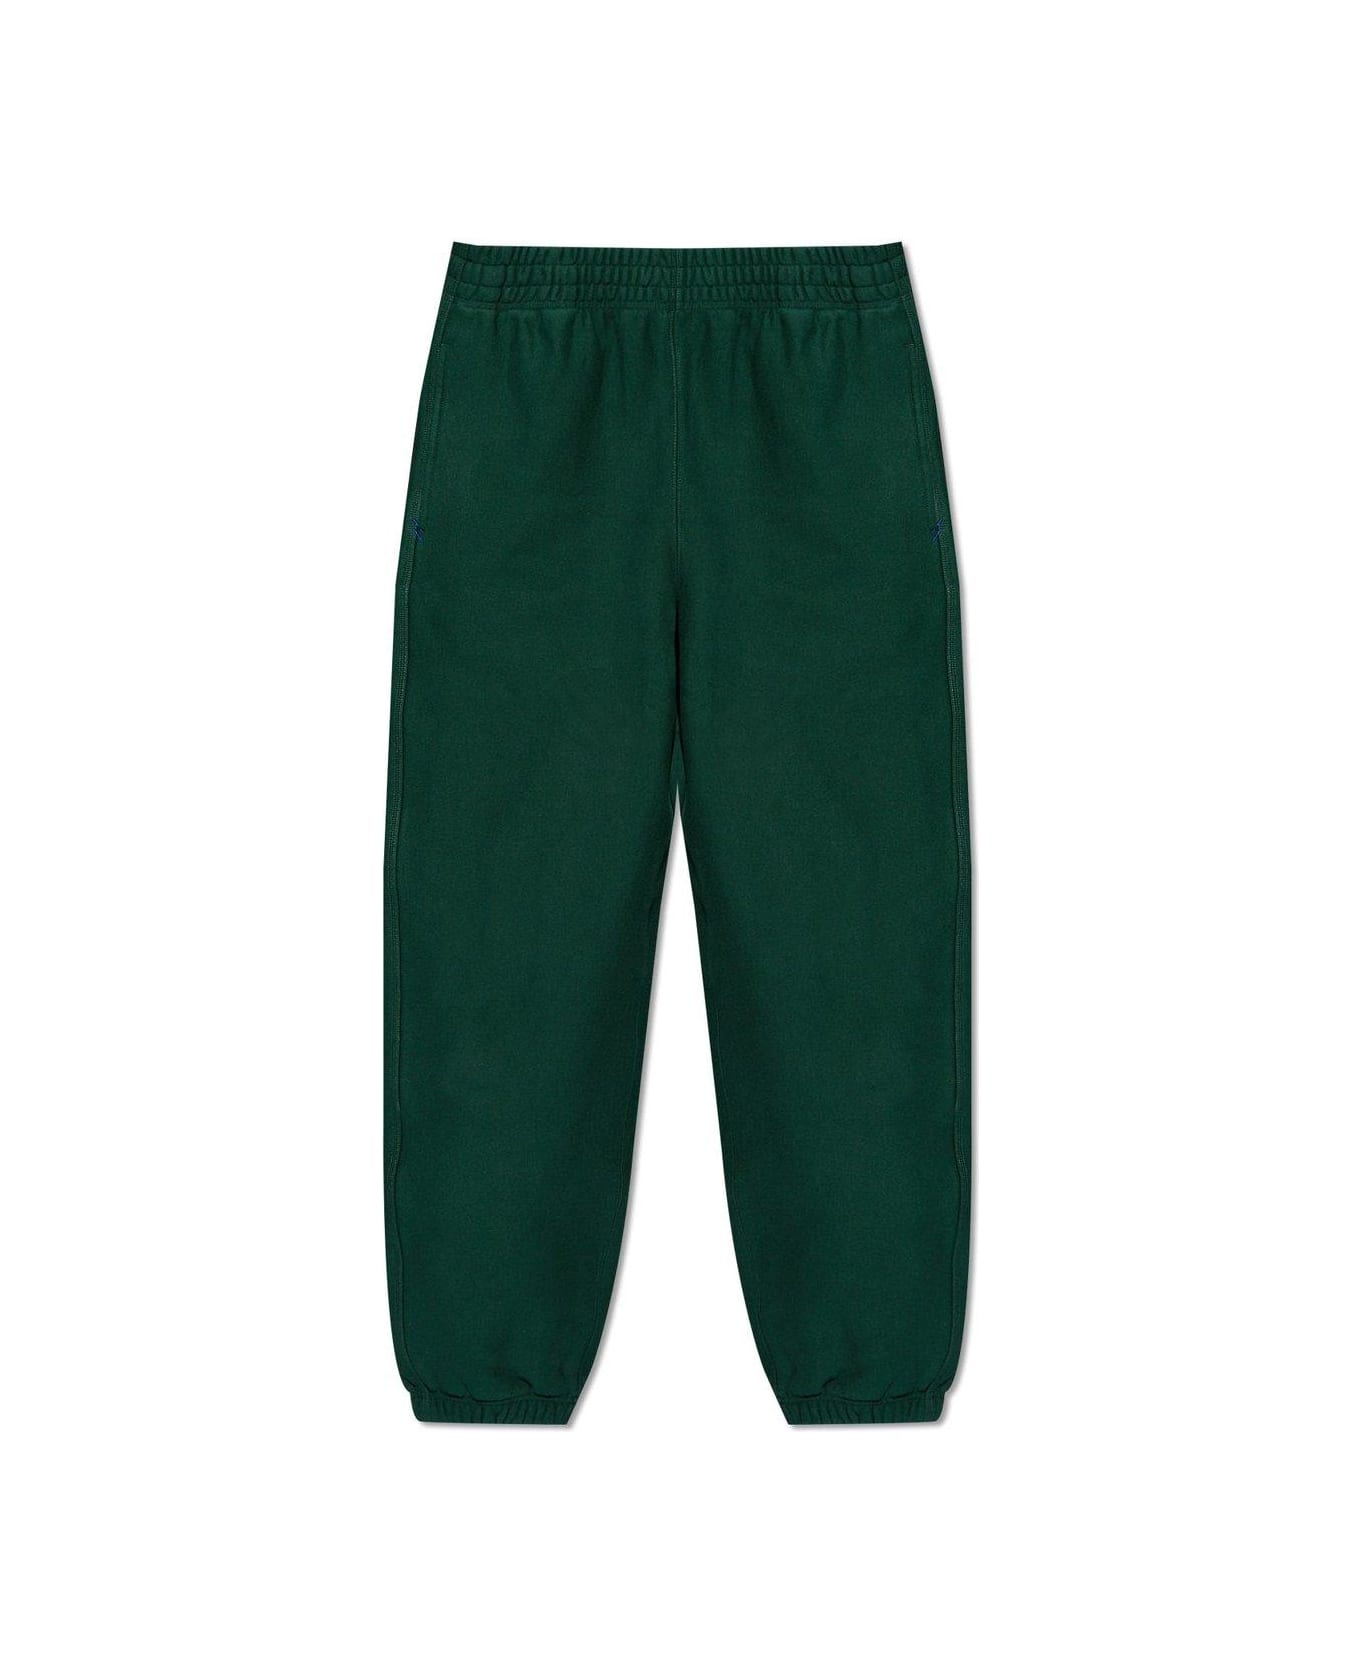 Burberry Equestrian Knight Patch Track Pants - Ivy スウェットパンツ